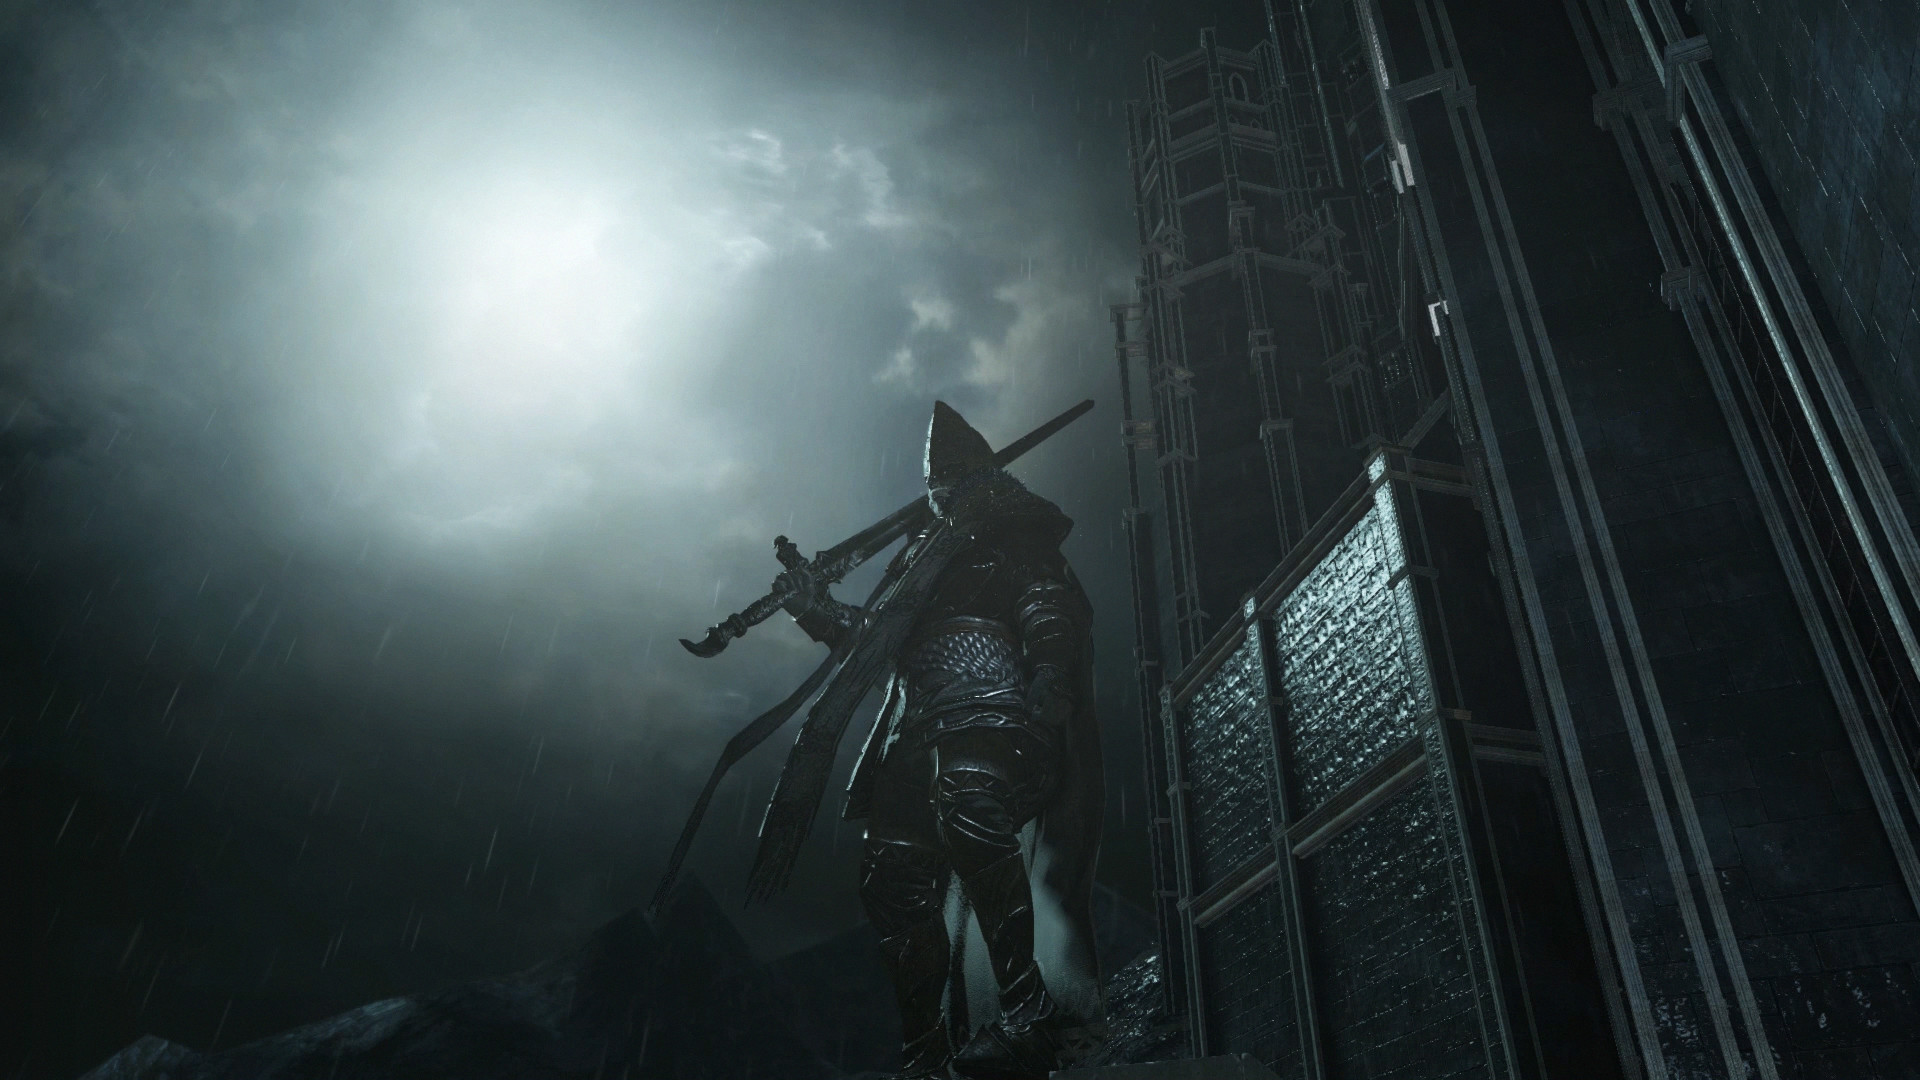 Dark Souls 1 has migrated to Steamworks Round 5 PC Tournament